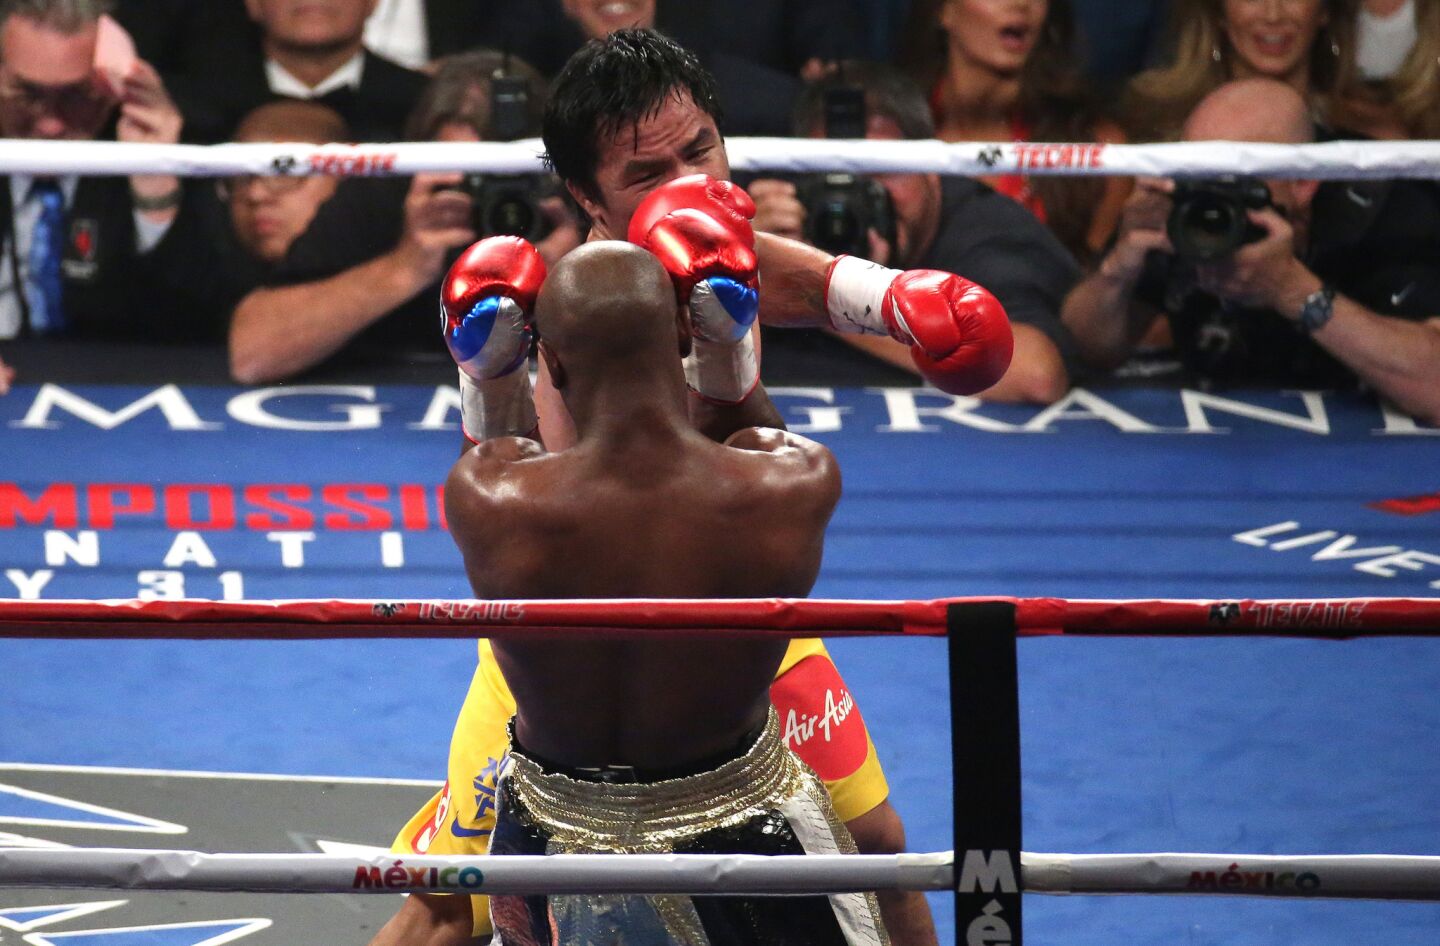 Manny Pacquiao fires away at Floyd Mayweather Jr. during the third round.